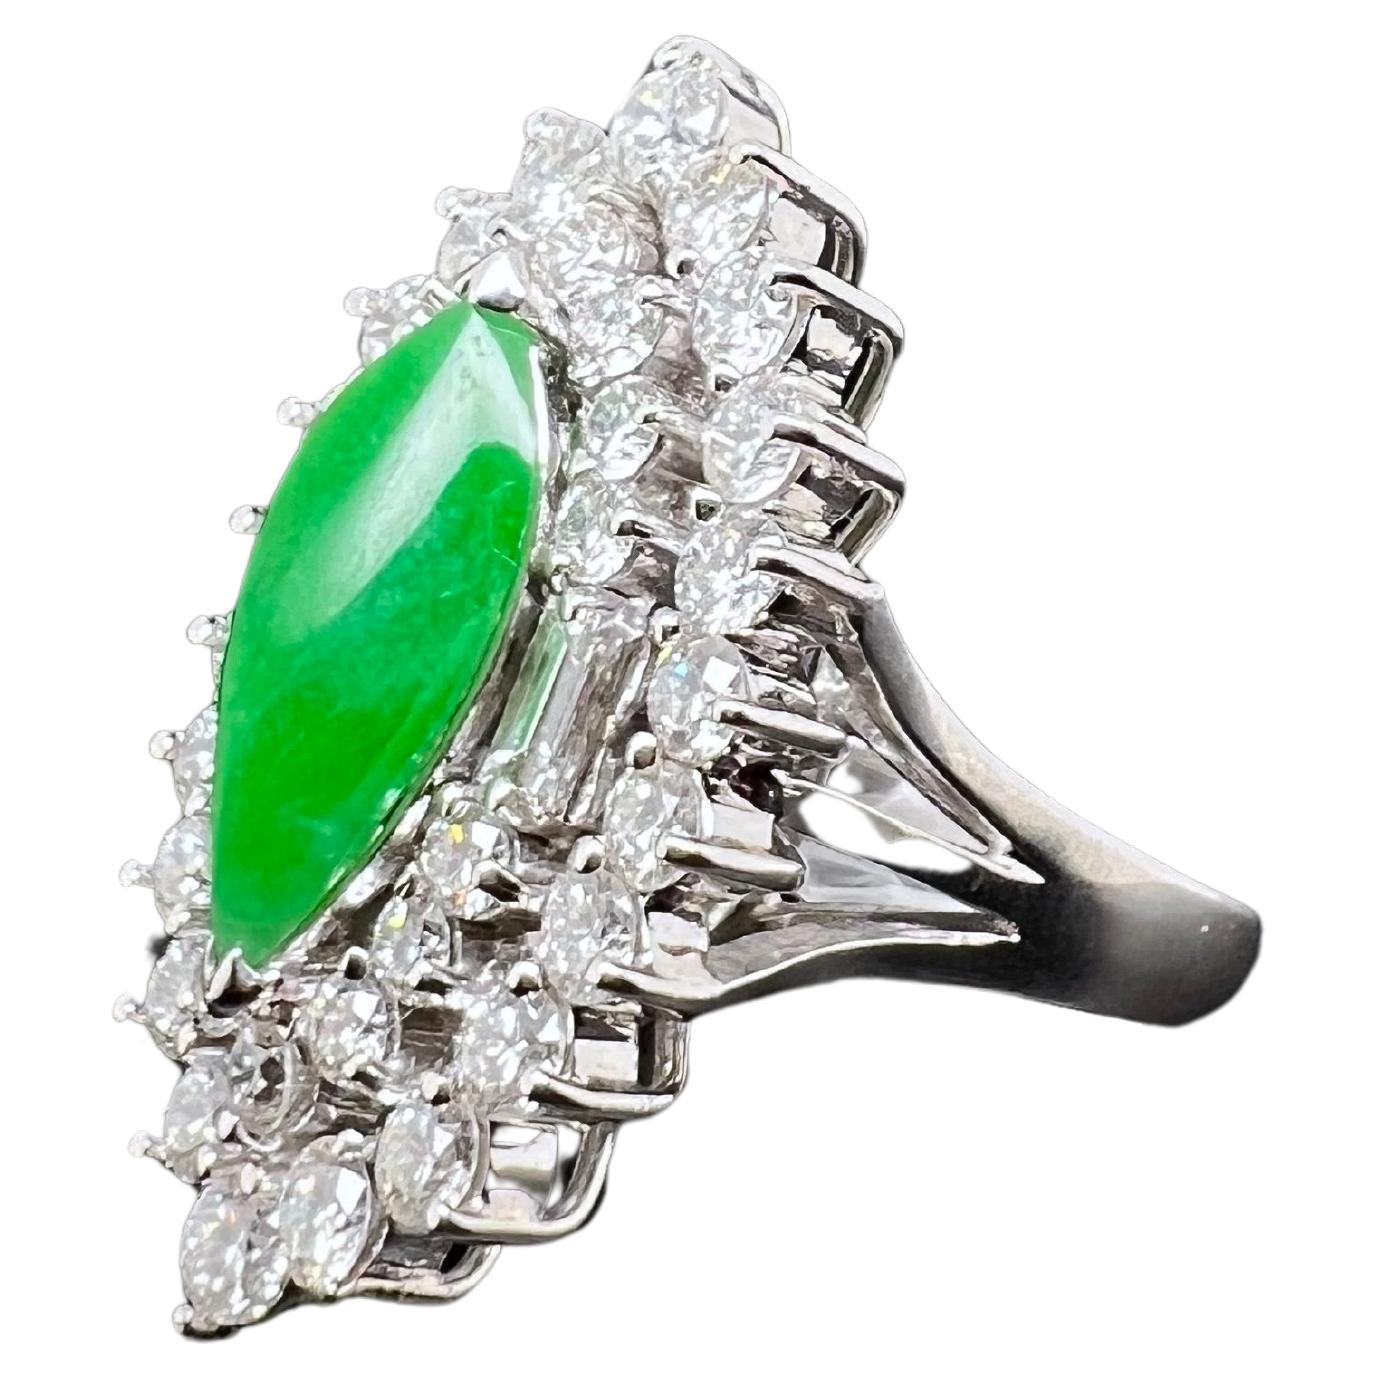 This phenomenal ring has a natural jadeite surrounded by round brilliant diamonds and baguettes set in 18k white gold. The elongated jadeite has a gorgeous glow stand outs amongst the bright, white diamonds. Natural Jadeite is not easy to come by